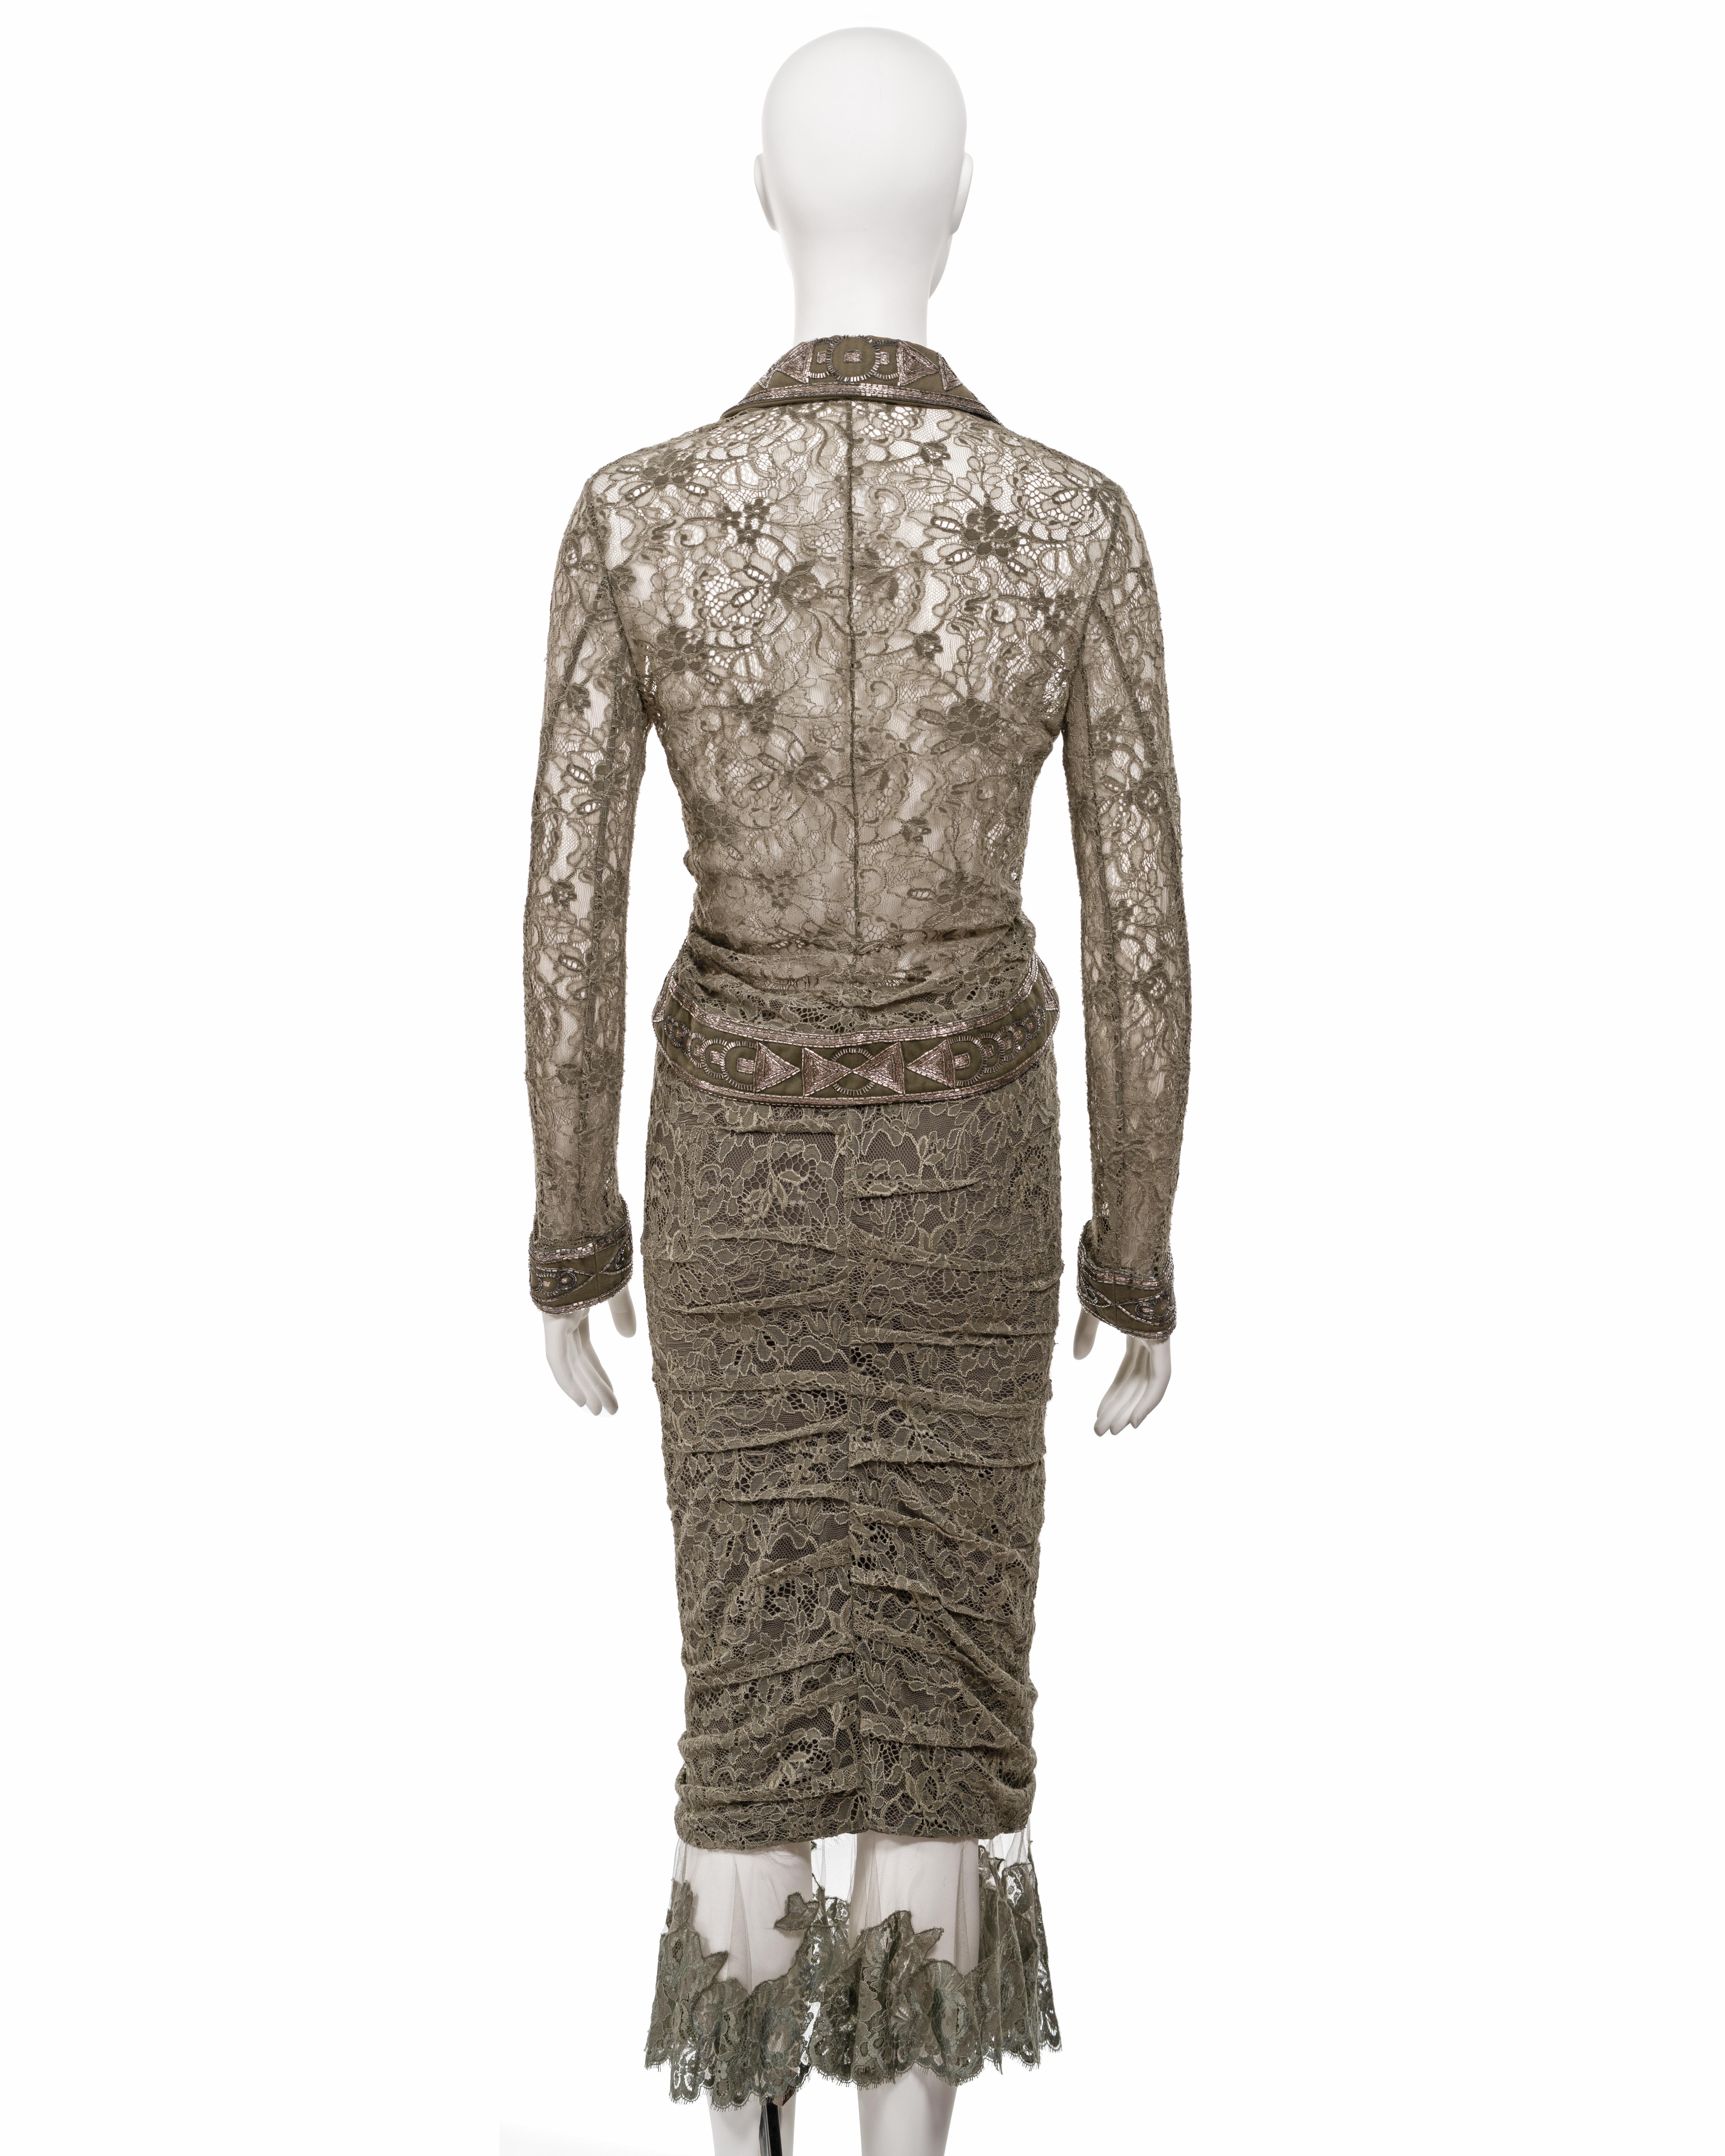 Christian Dior by John Galliano green lace beaded skirt suit, fw 2003 For Sale 5